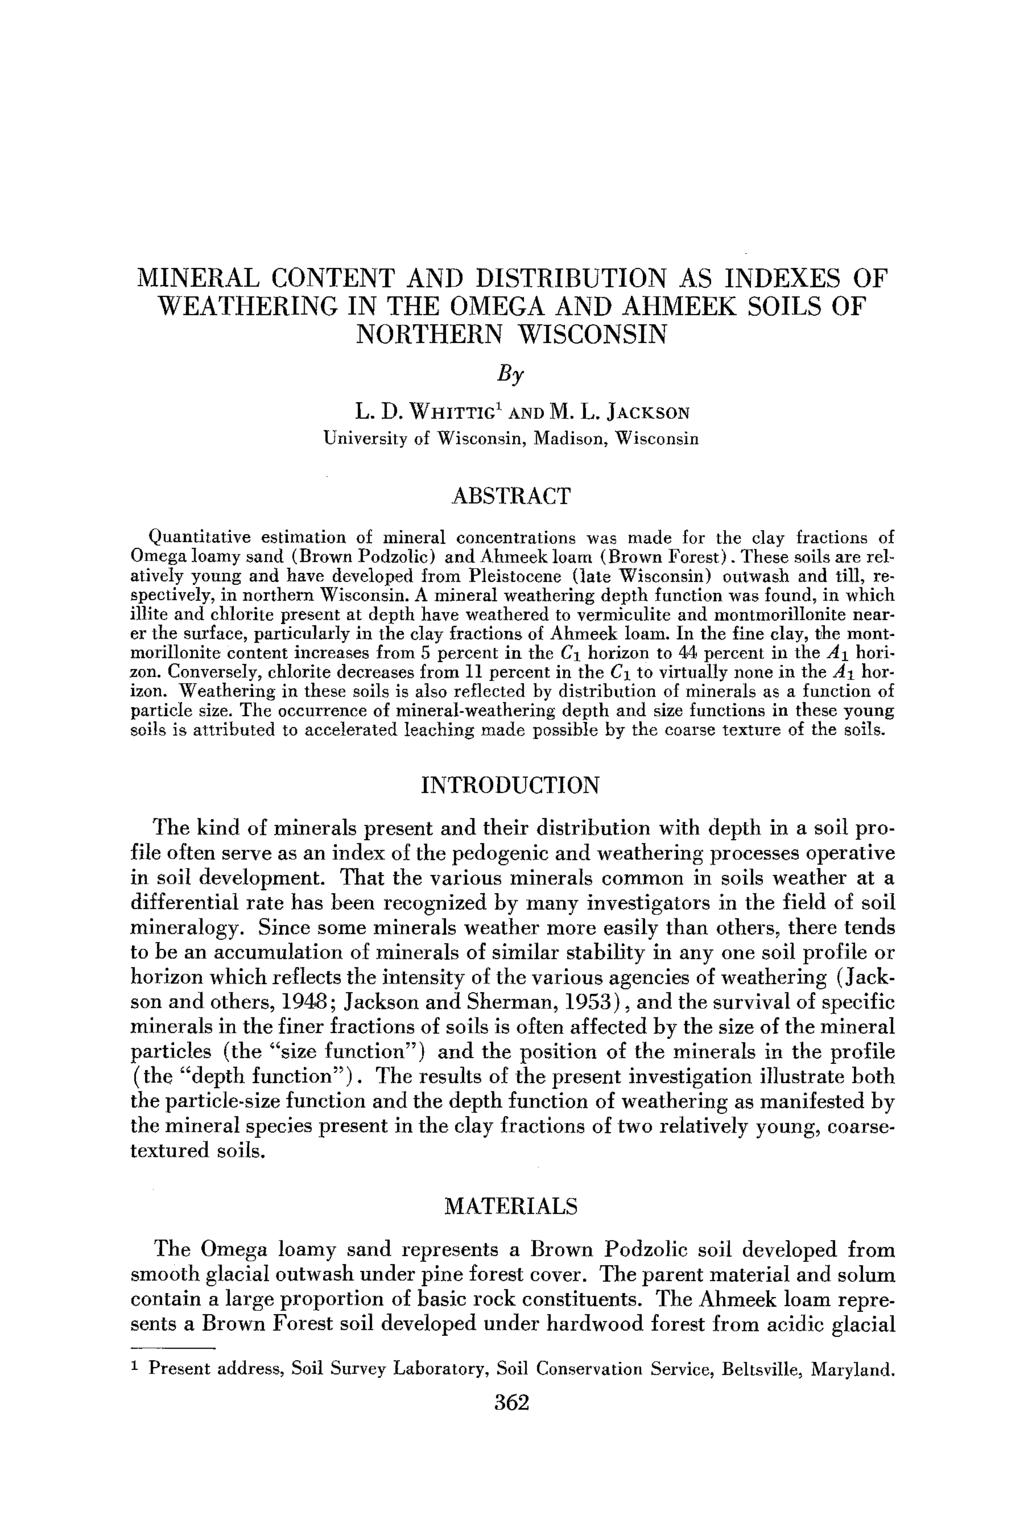 MINERAL CONTENT AND DISTRIBUTION AS INDEXES OF WEATHERING IN THE OMEGA AND AHMEEK SOILS OF NORTHERN WISCONSIN By L.